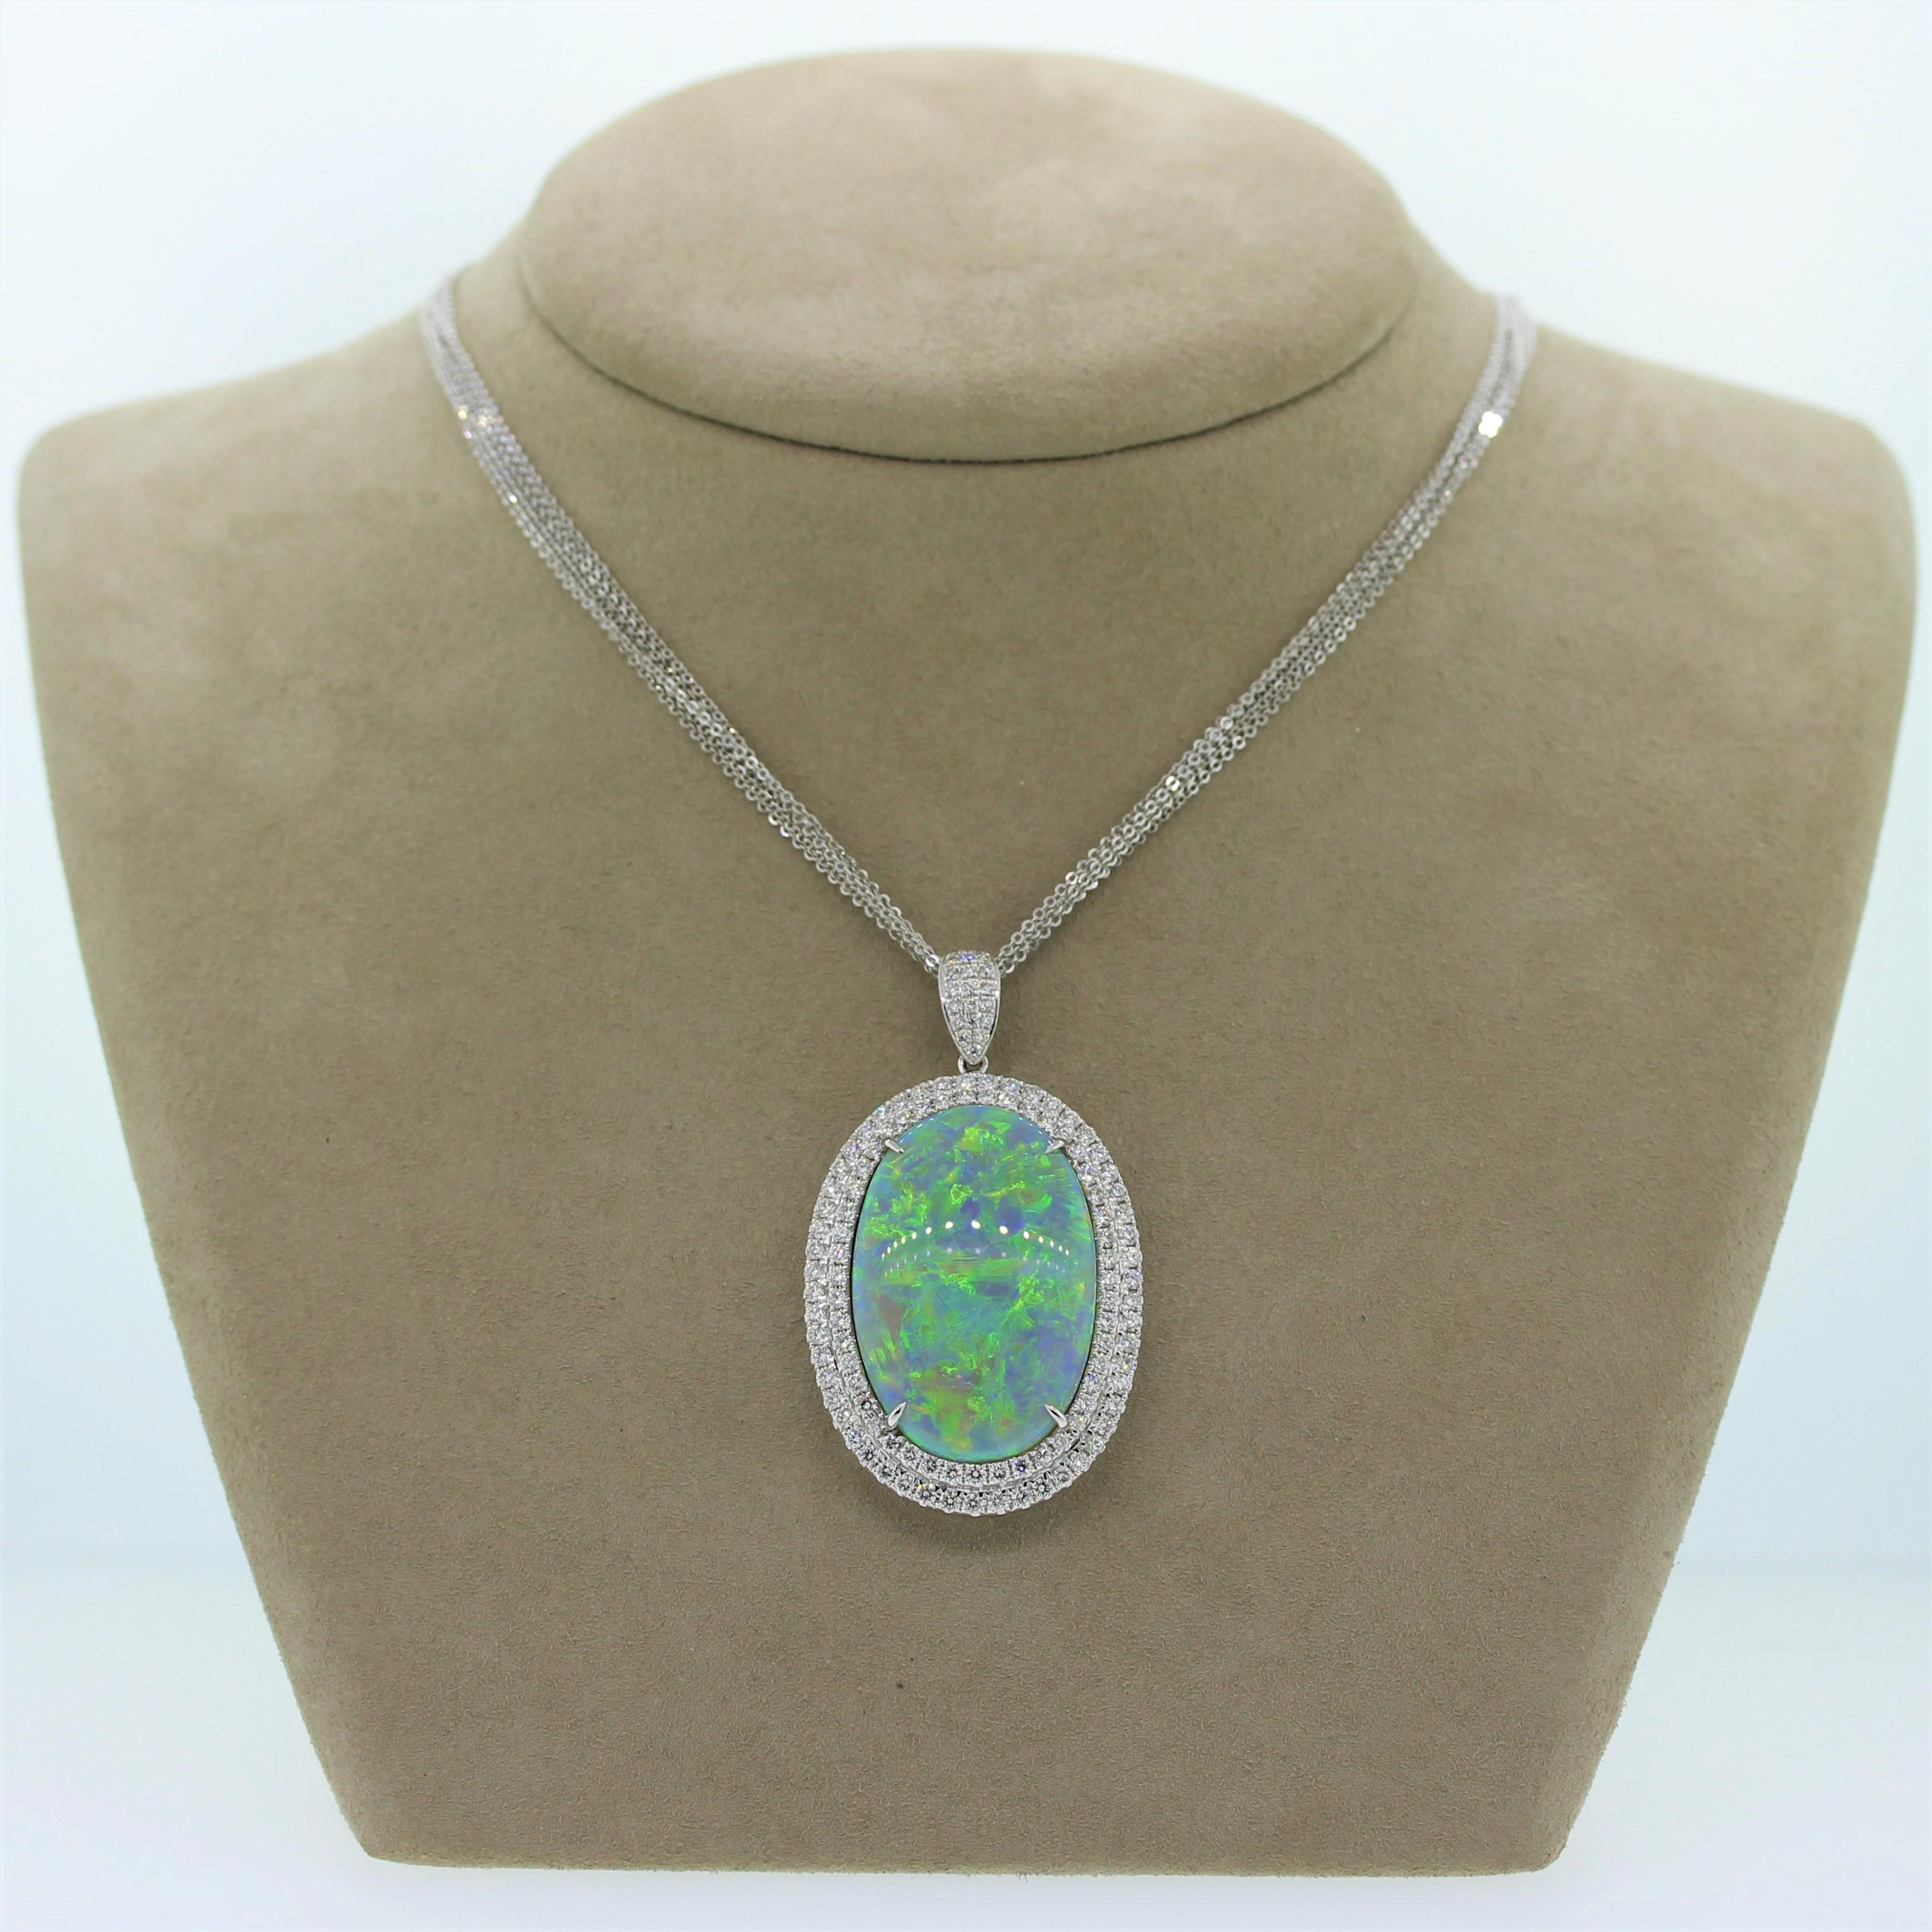 A contemporary pendant featuring a large and impressive 39.76 carat Australian opal in a 18K white gold setting. The oval shaped gem shows strong play of color with bright flashes of blue, green, and orange. It is encased in a double halo of 3.28